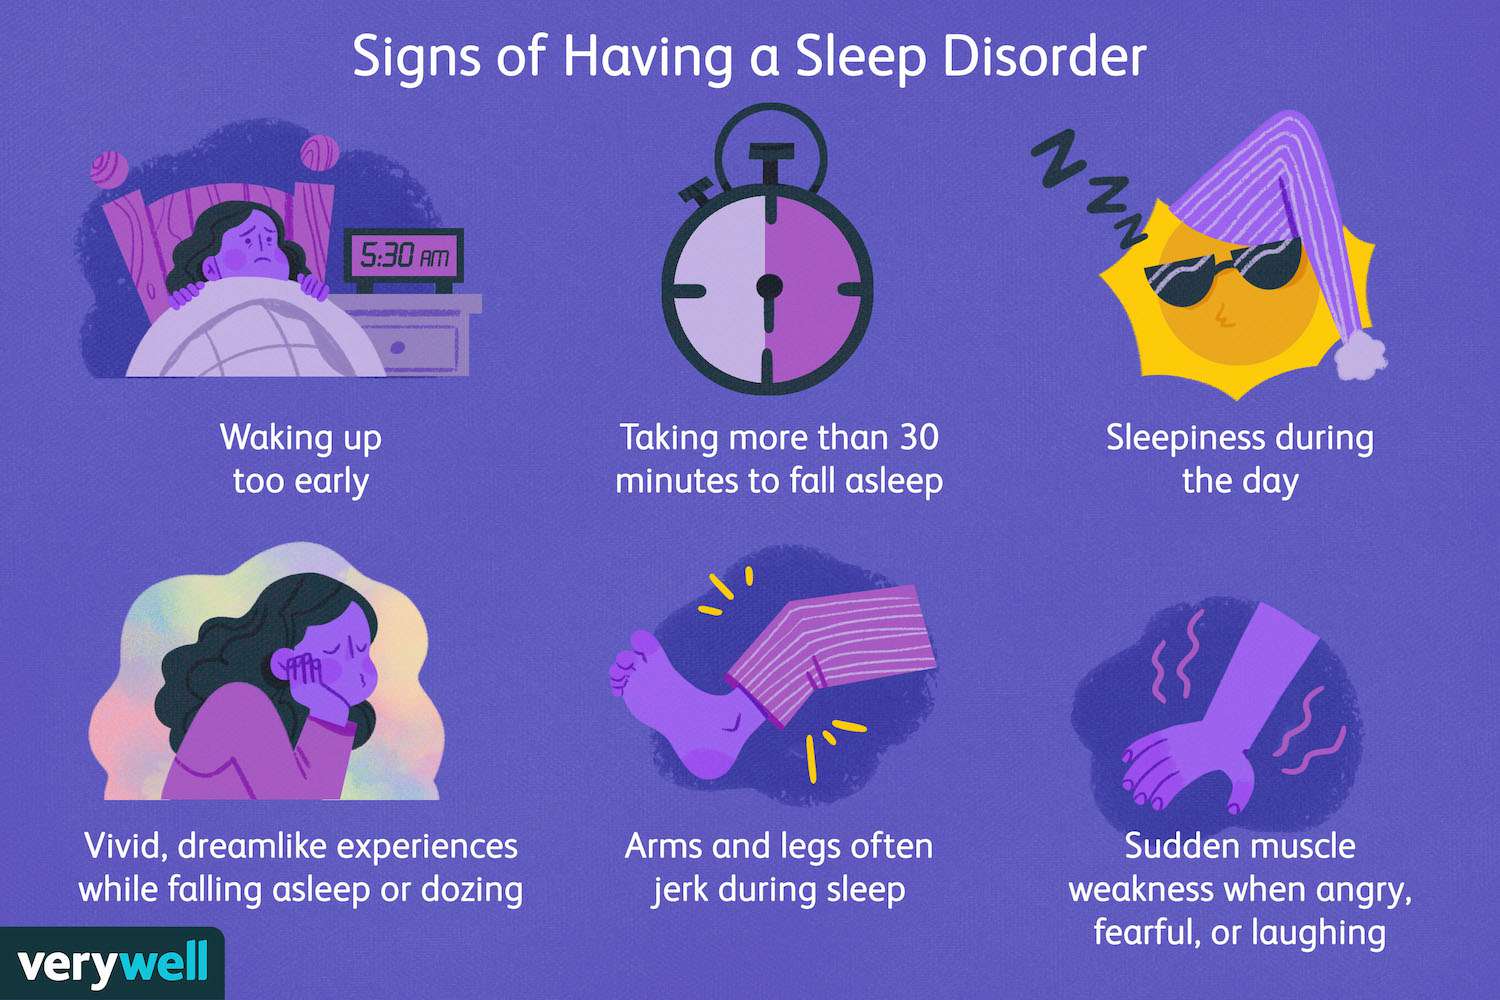 What are the effects of sleep disorders on mental health?